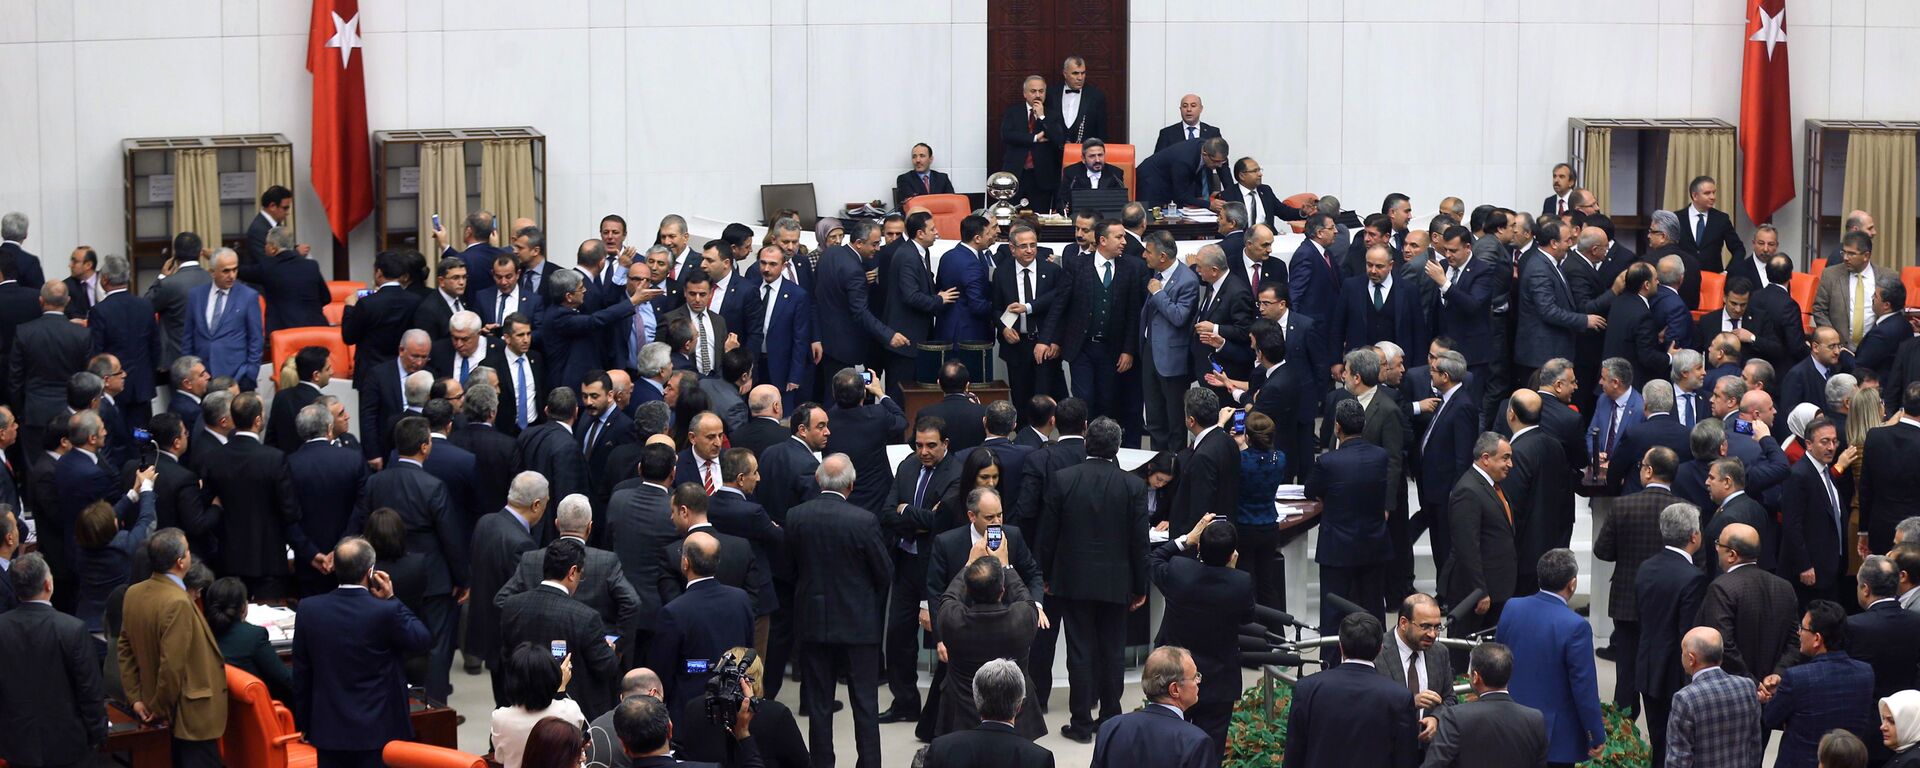 Turkish lawmakers cast their votes during a debate for a proposal for change in the constitution on January 10, 2017 at the Turkish parliament in Ankara. Turkey's parliament on January 9, 2017 began debating a controversial new draft constitution aimed at expanding the powers of the presidency under Recep Tayyip Erdogan - Sputnik International, 1920, 17.10.2023